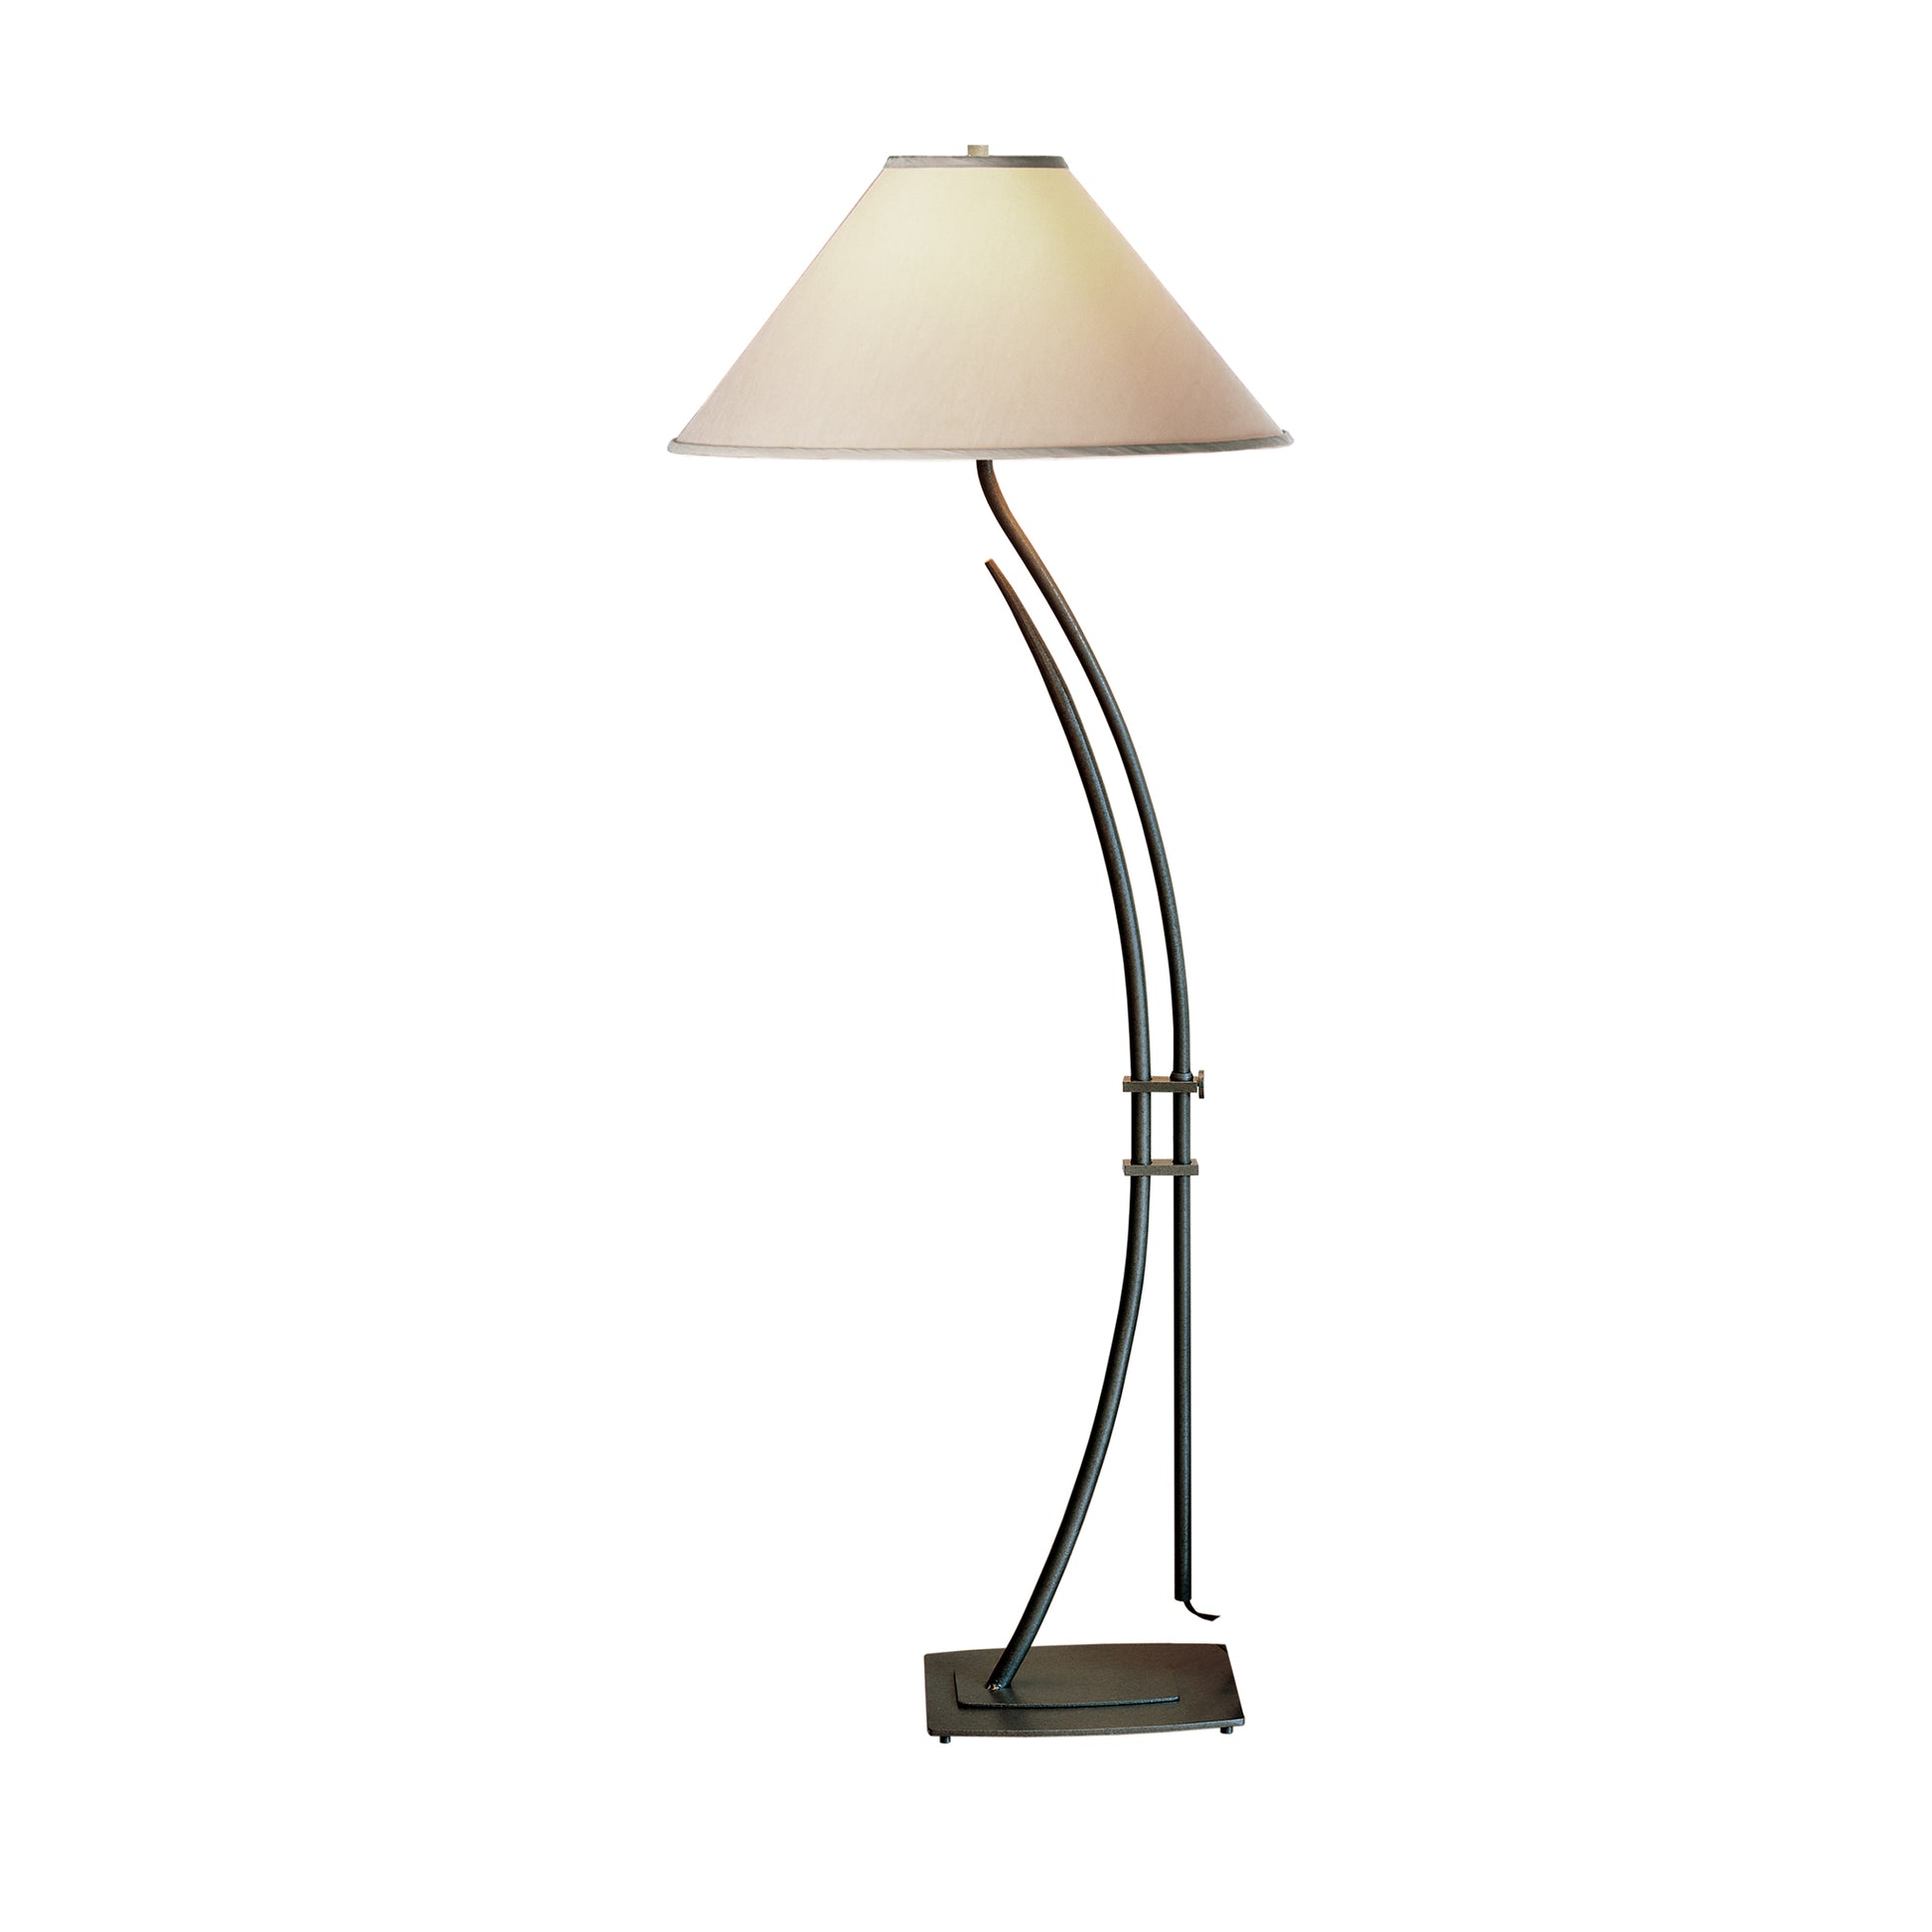 A Metamorphic Contemporary Floor Lamp by Hubbardton Forge with a beige shade on a white background.